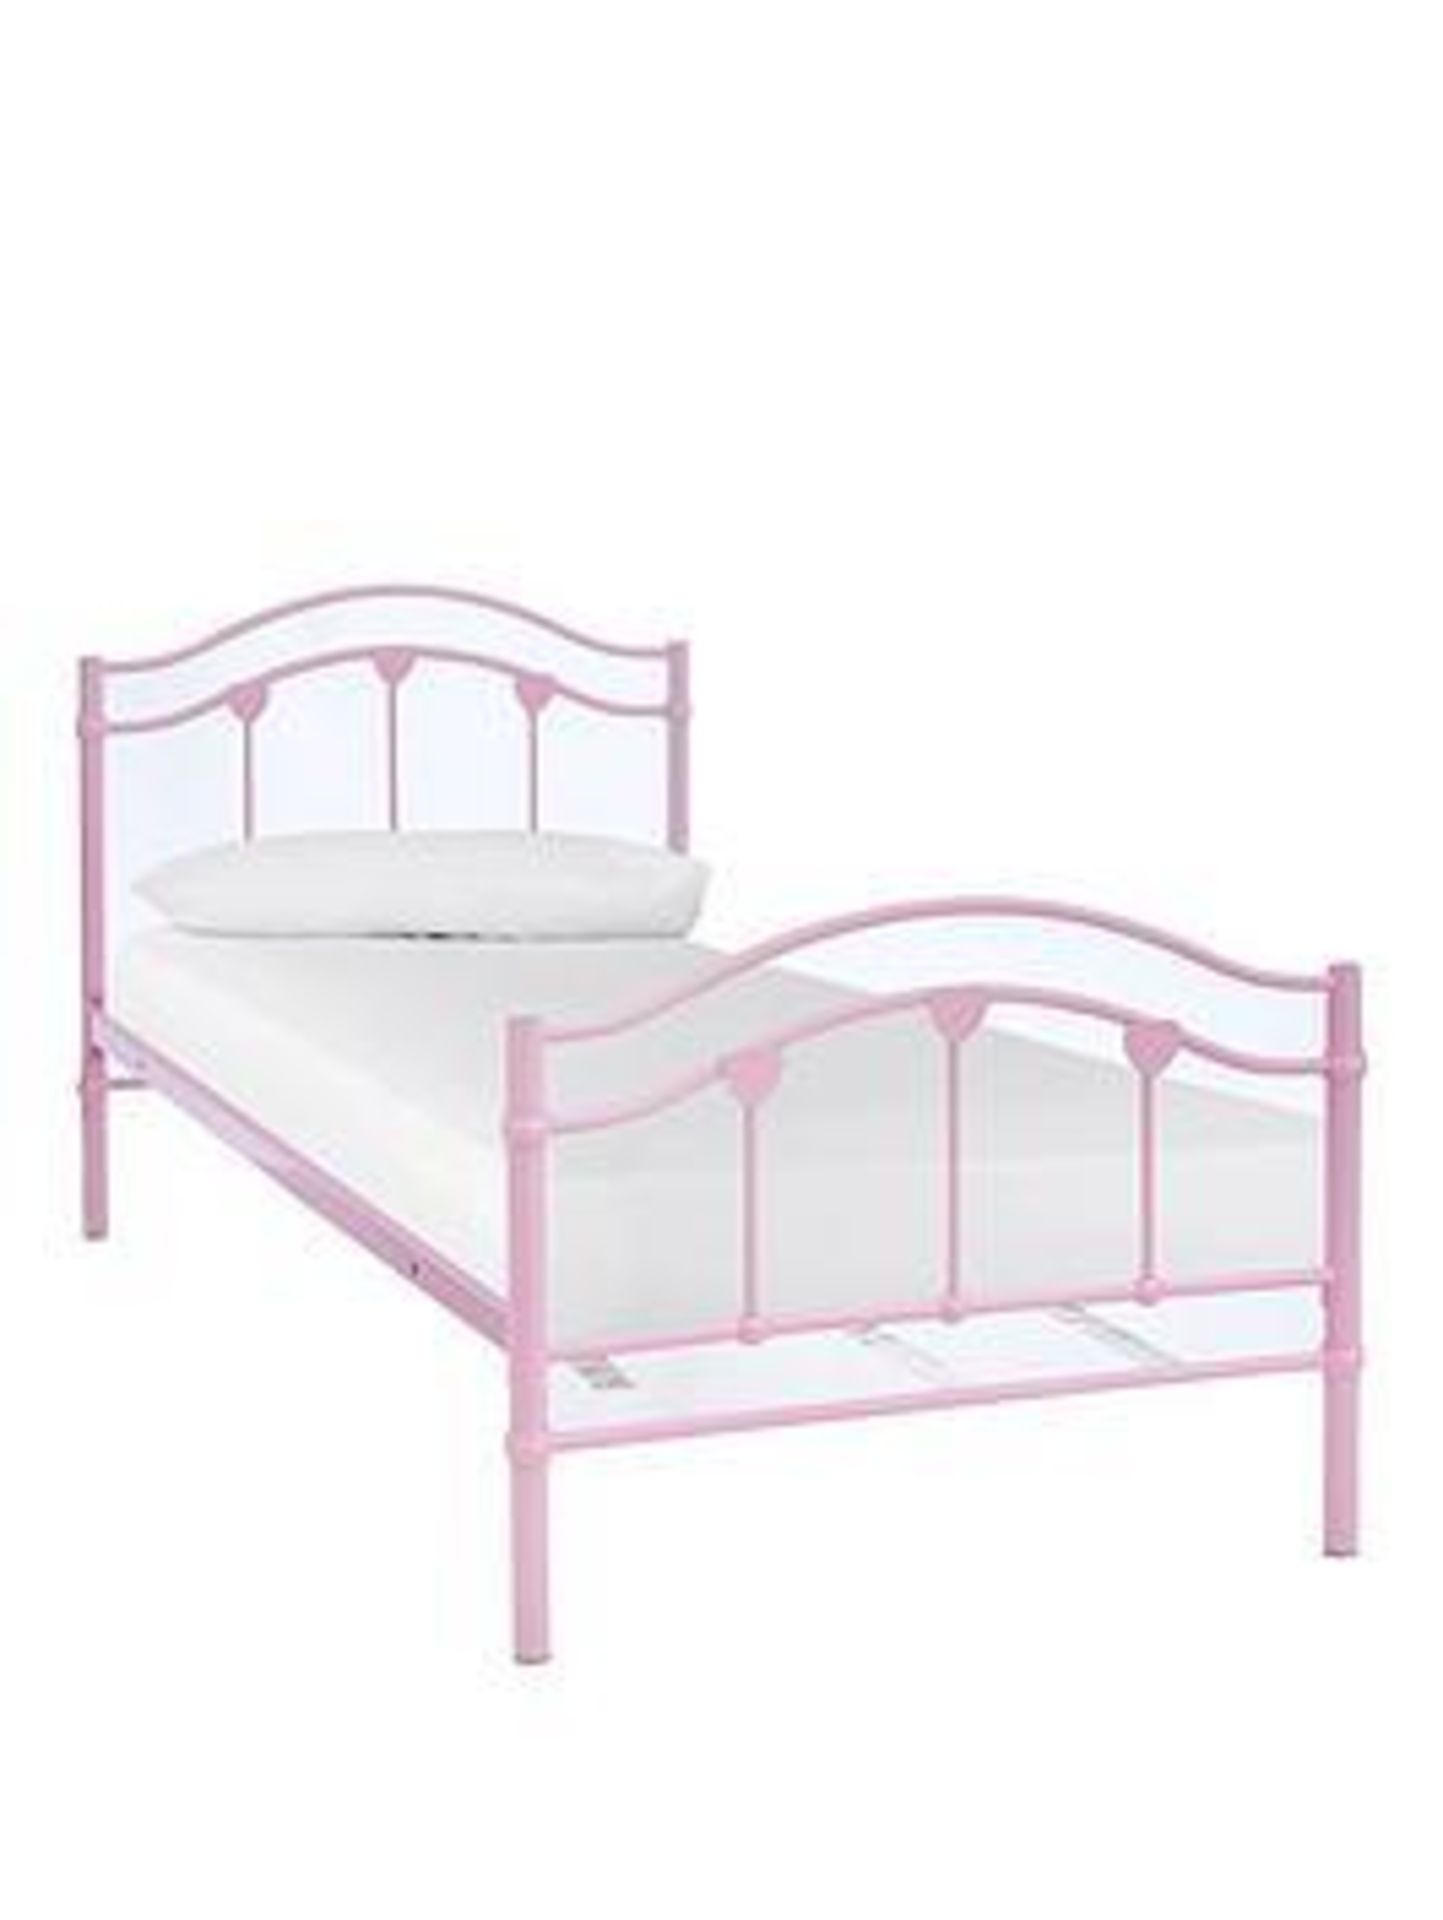 Boxed Item Heart Single Bed [Pink] 95X196X98Cm Rrp:£150.0